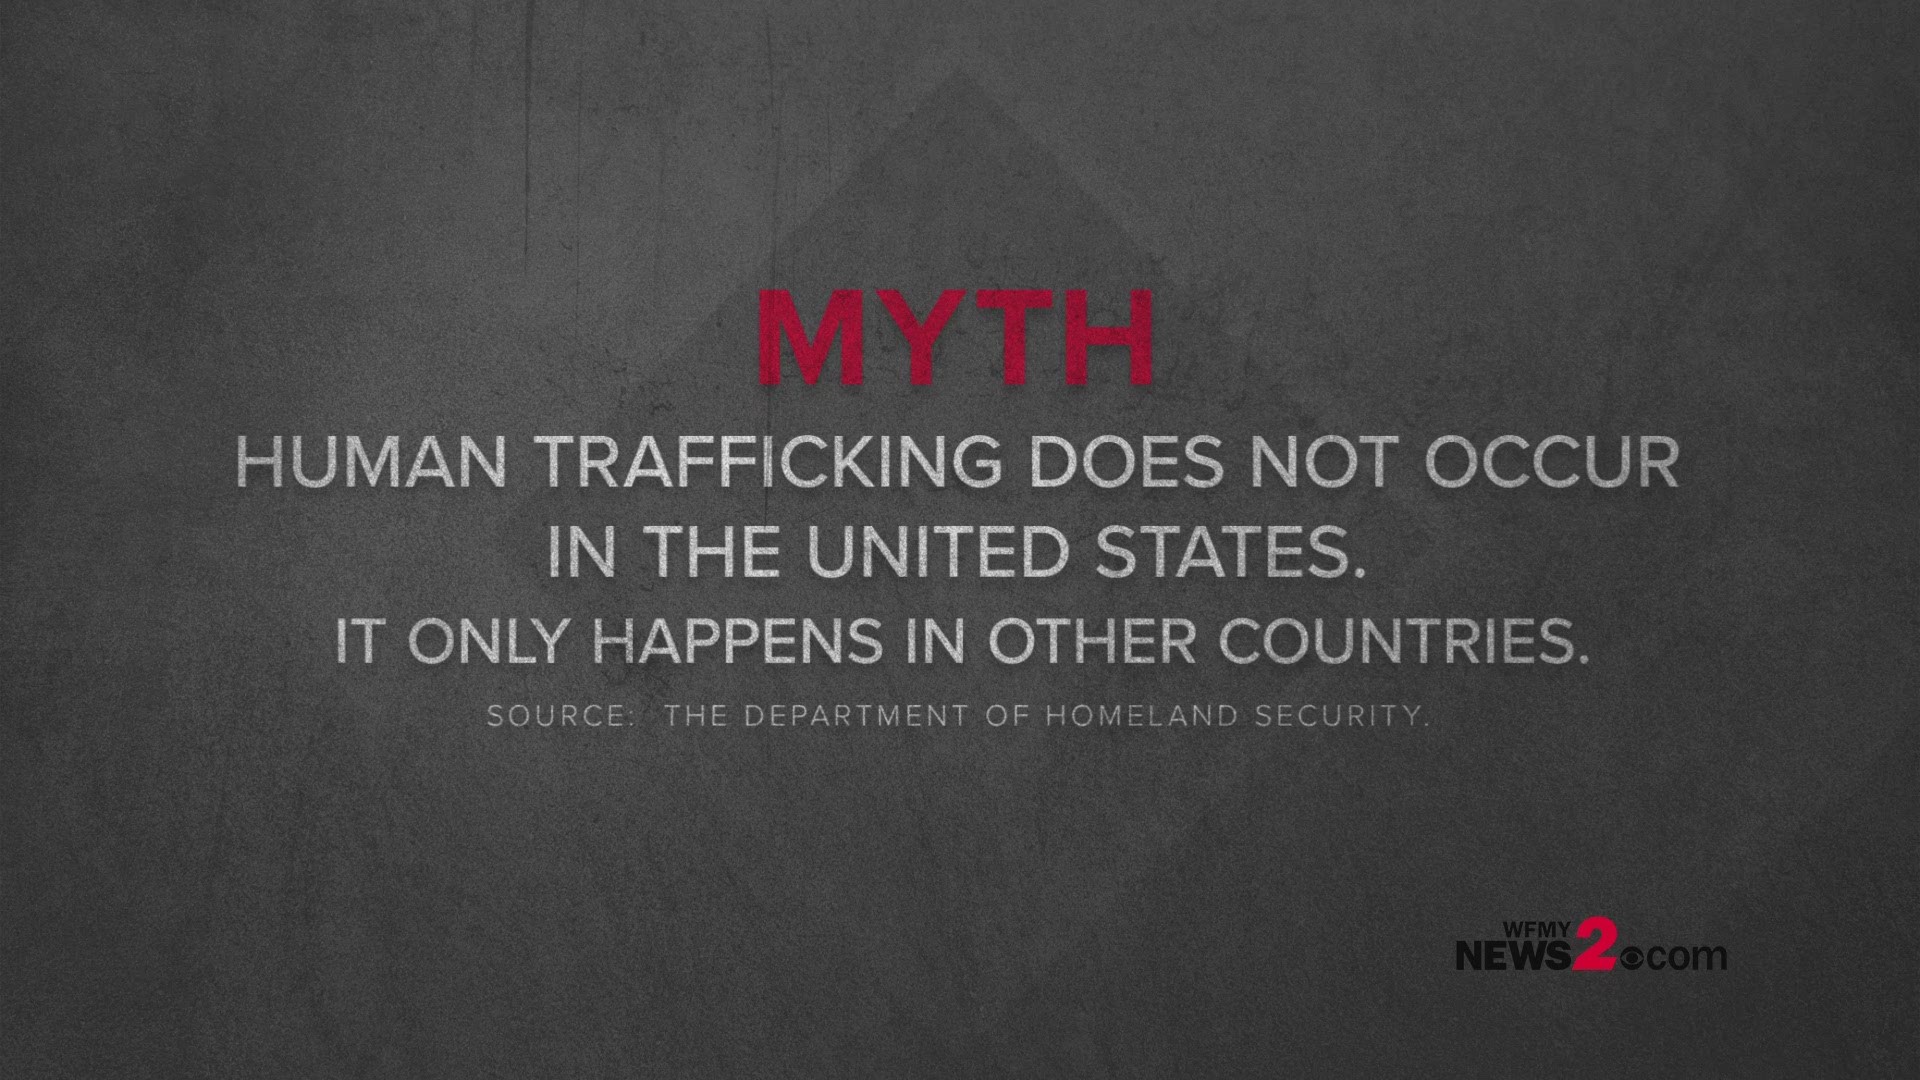 Human trafficking does not only happen in foreign countries. The Department of Homeland Security says it also exists the United States.